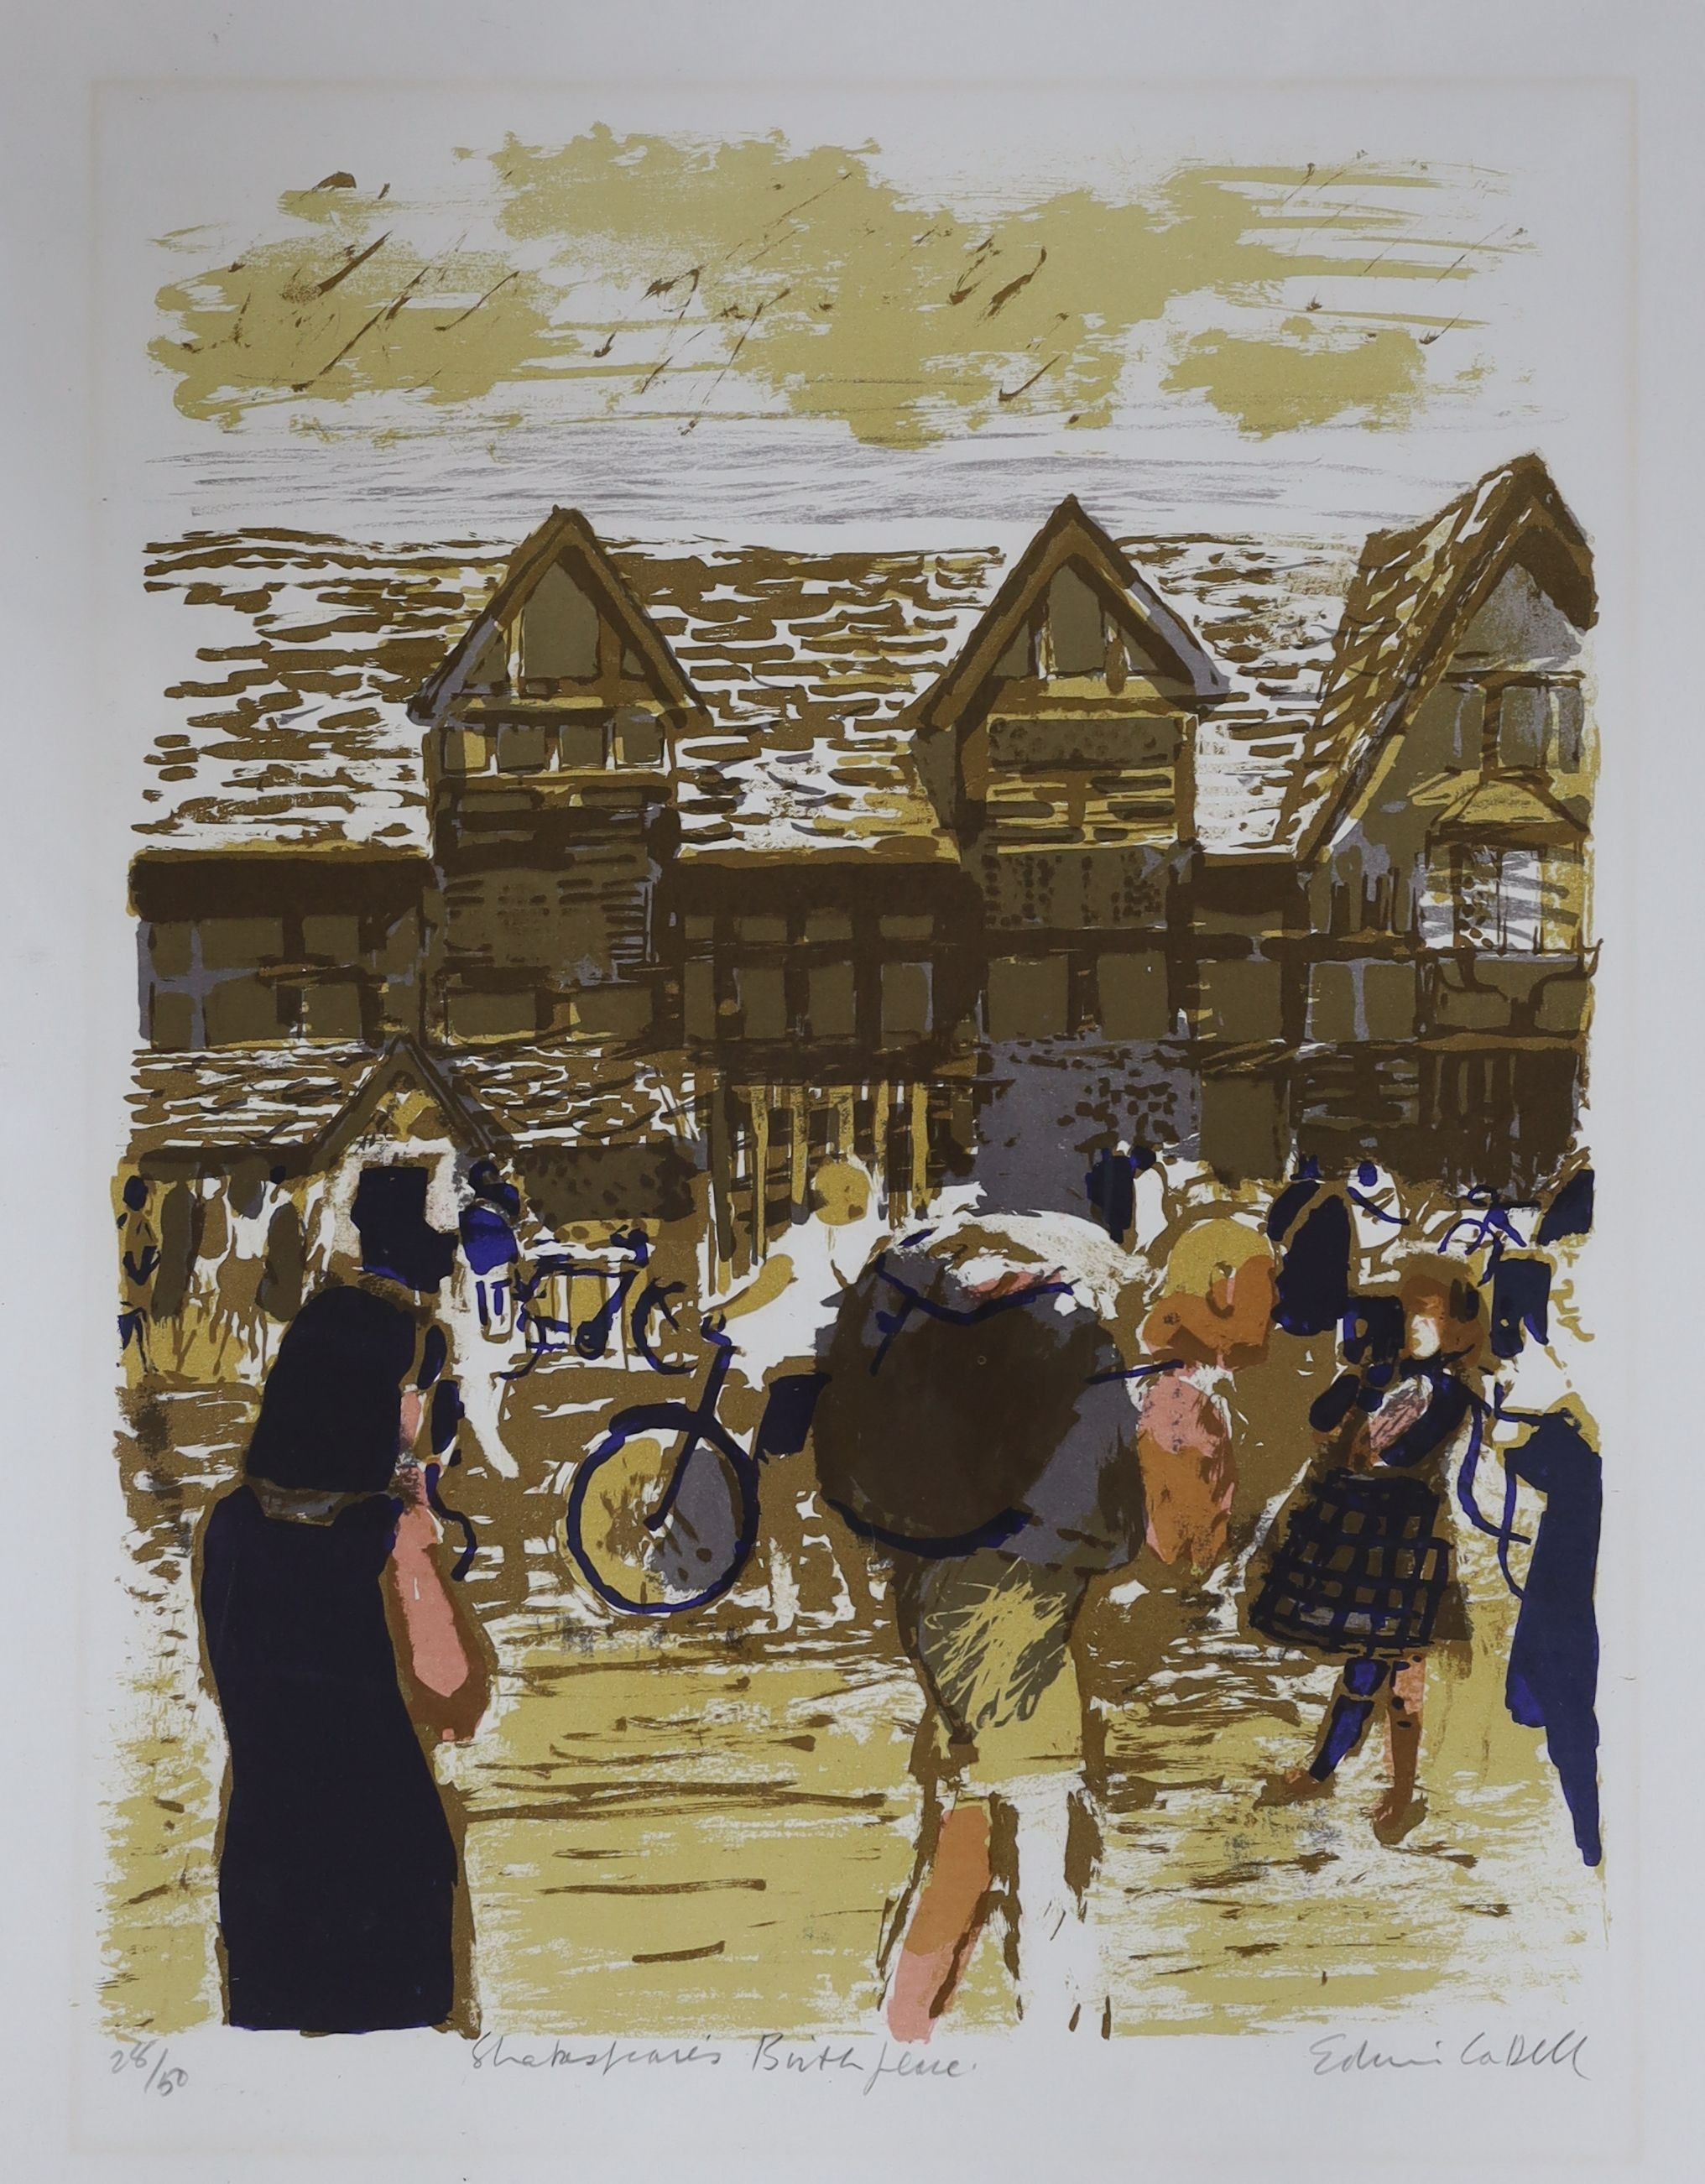 Edwin Ladell (1919-1970), lithograph, 'Shakespeare's Birth Place', signed in pencil, 28/50, 60 x 47cm, unframed